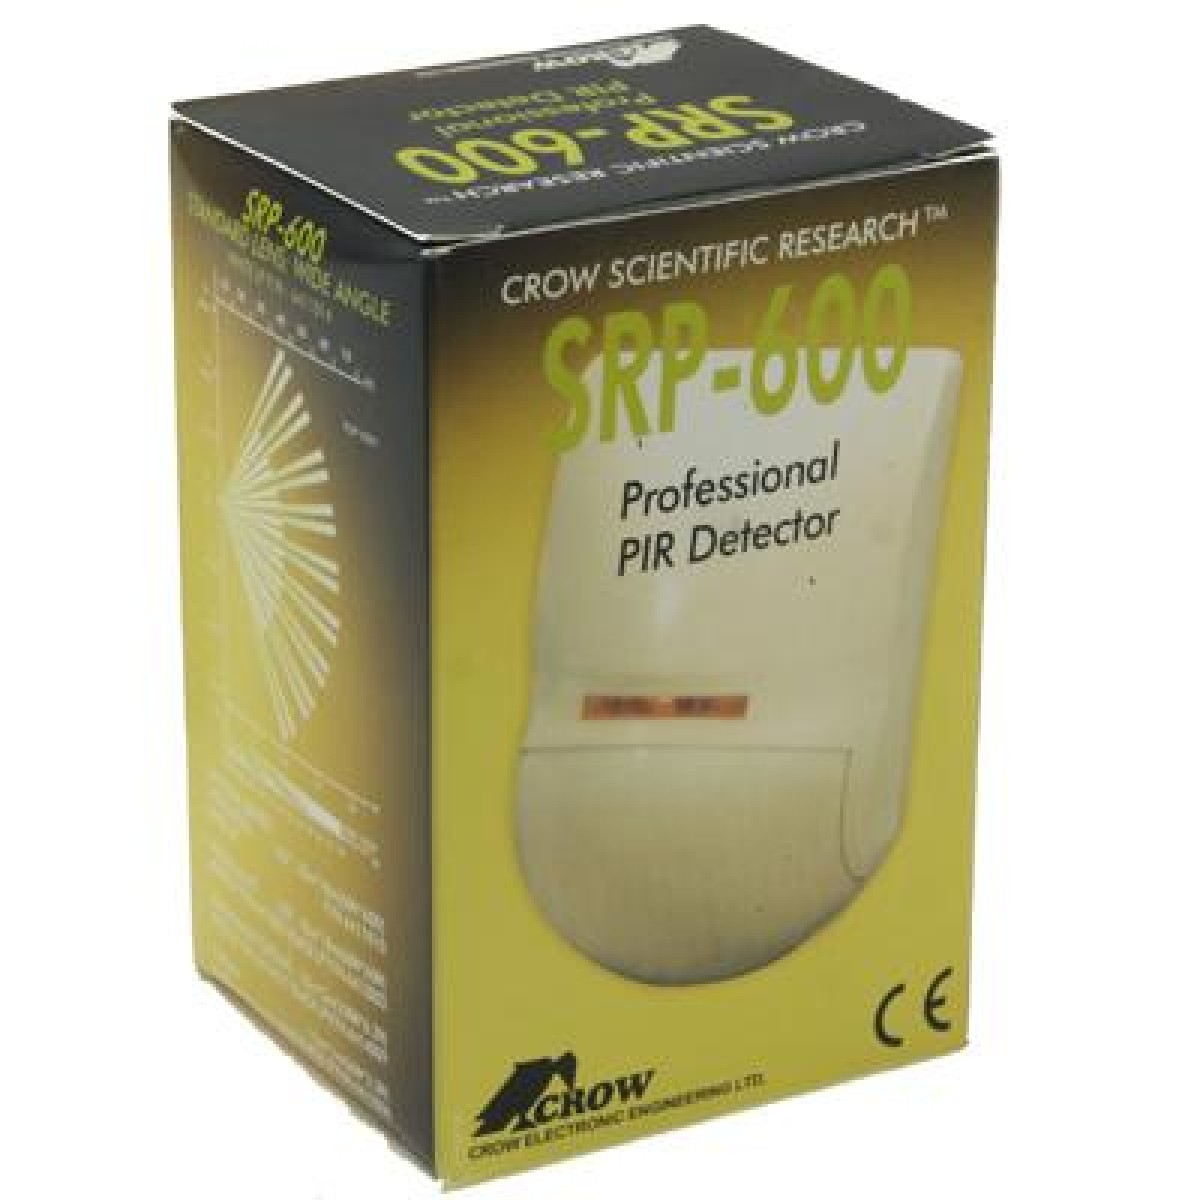 SRP-600 Crow Crystal Vision Technology Alarm Passive Infrared dual Motion Detector